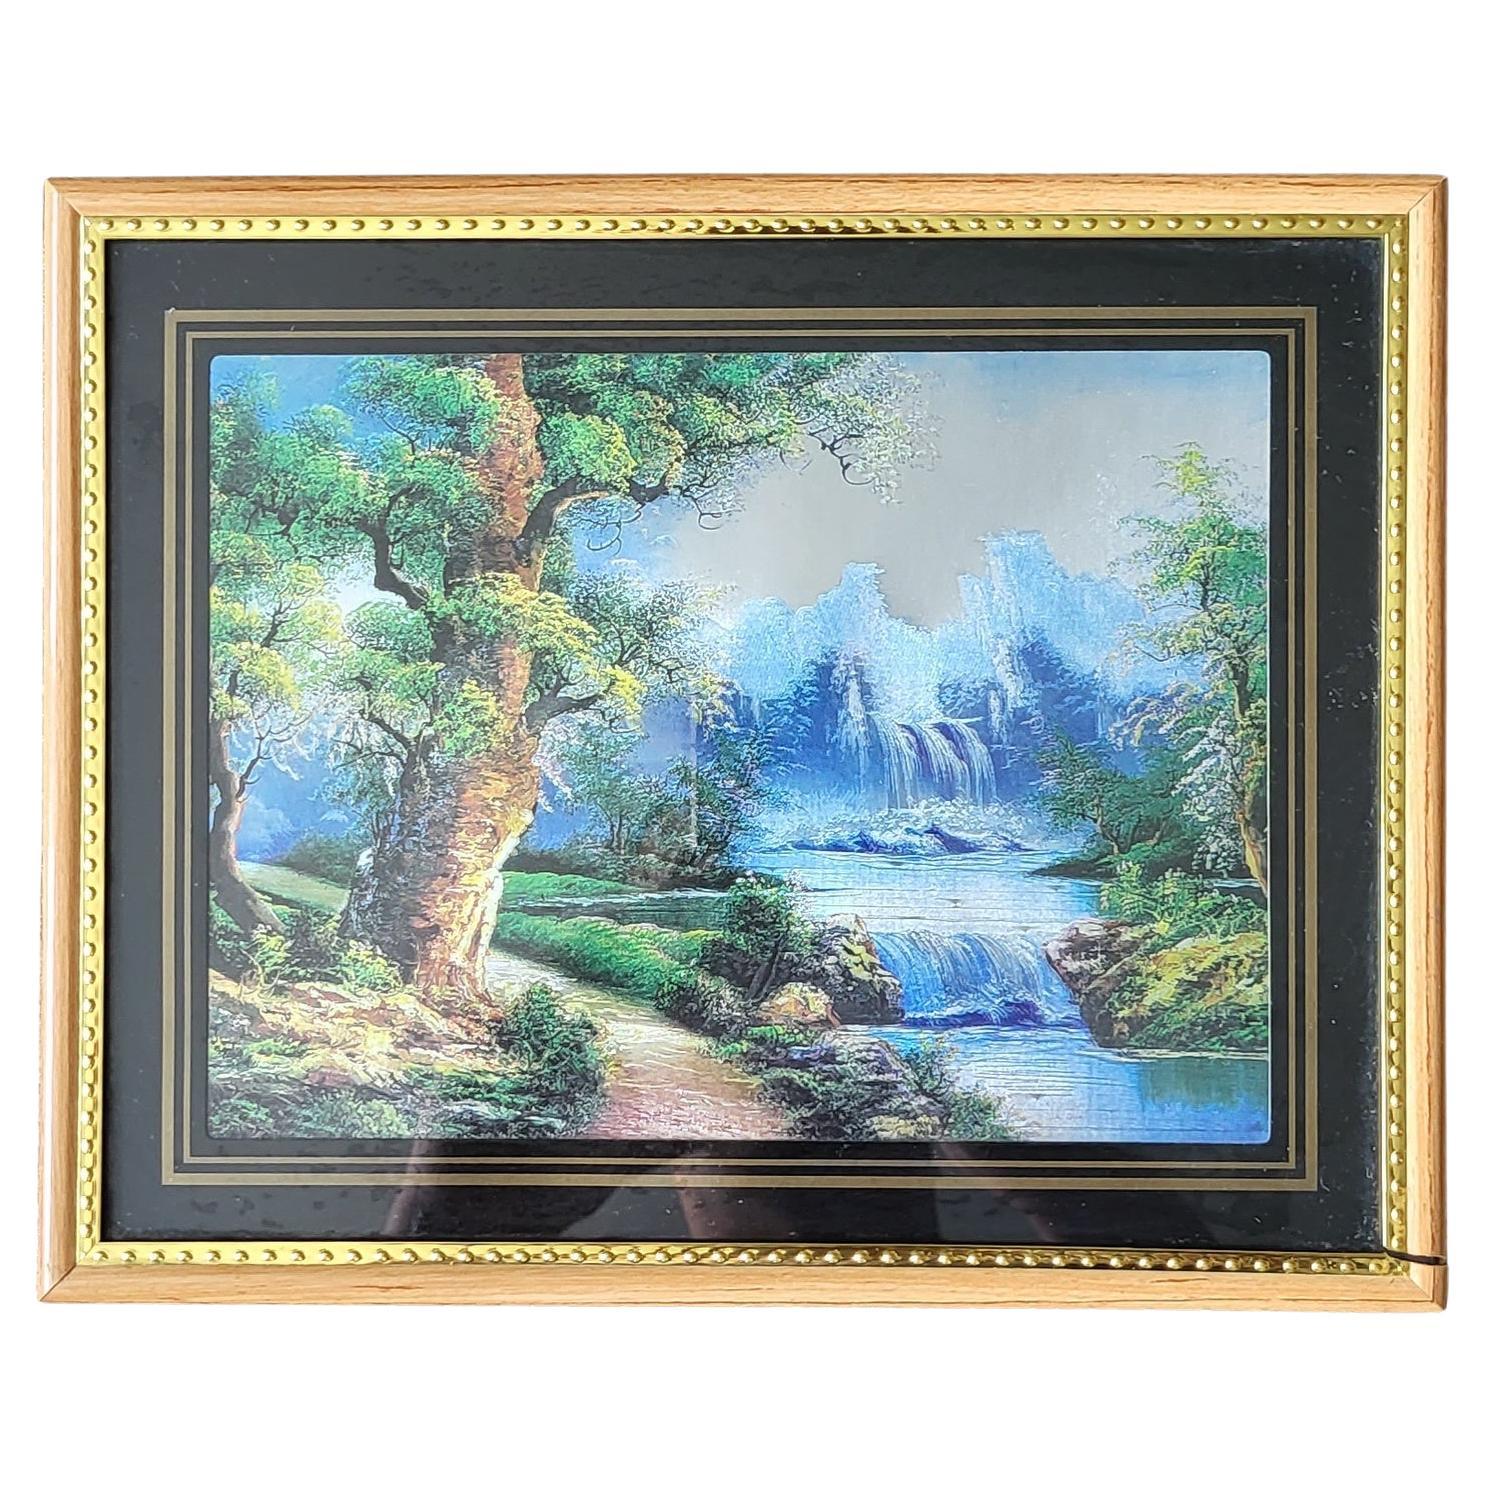 Dynamic Color-Changing Framed Print: Captivating Artwork from the 1990s 1J37